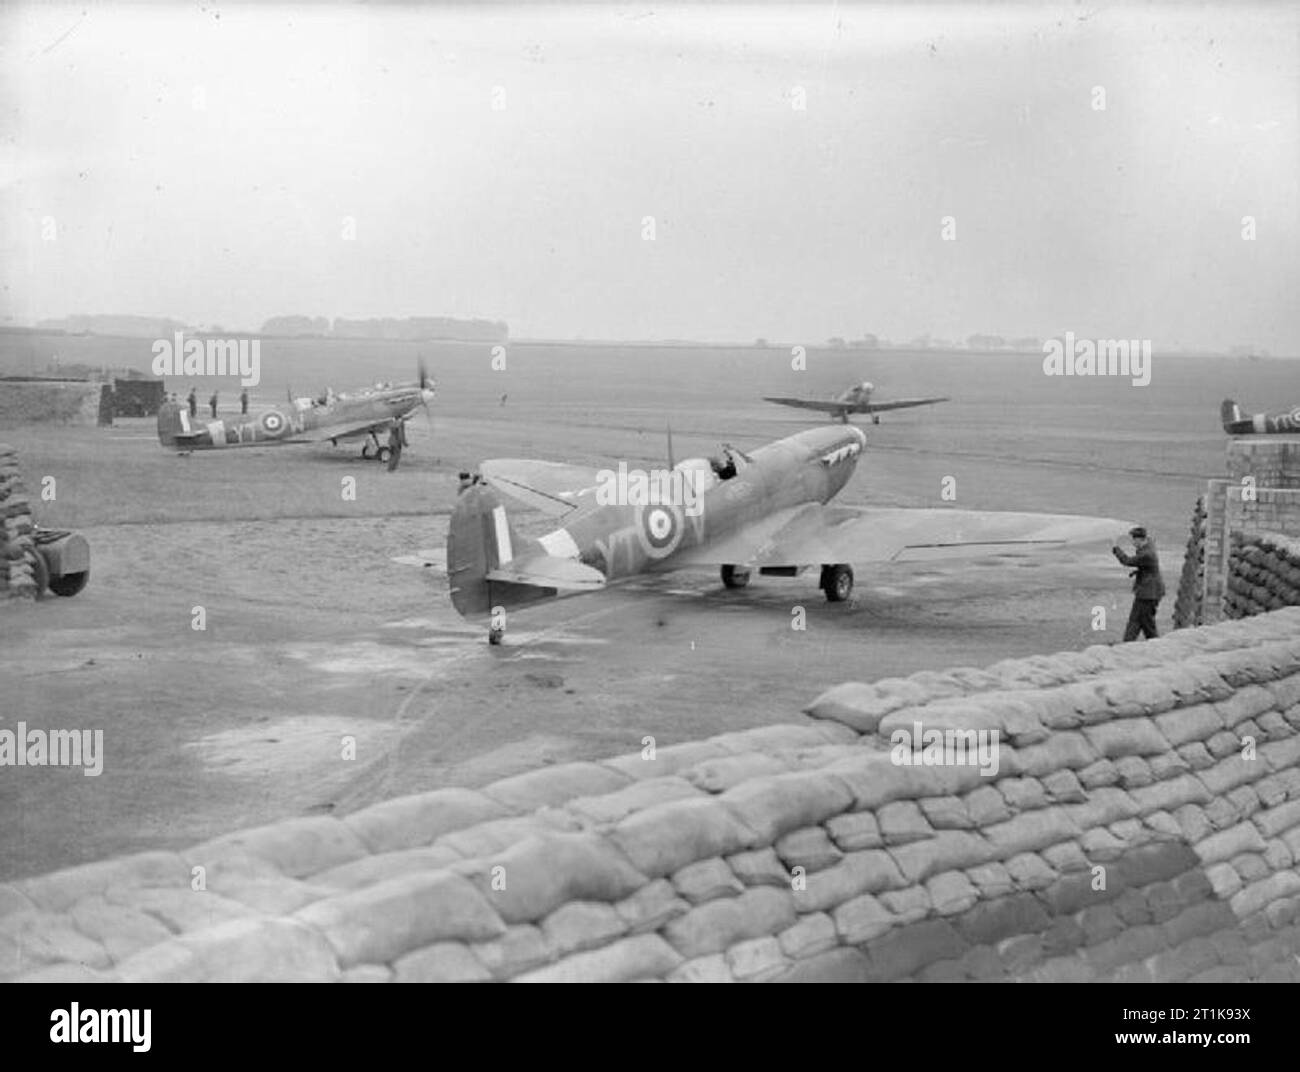 Royal Air Force Fighter Command, 1939-1945. A flight of Supermarine Spitfire Mark IIAs of No. 65 Squadron RAF move out of their dispersal at Kirton-in-Lindsey, Lincolnshire, for take off. Stock Photo